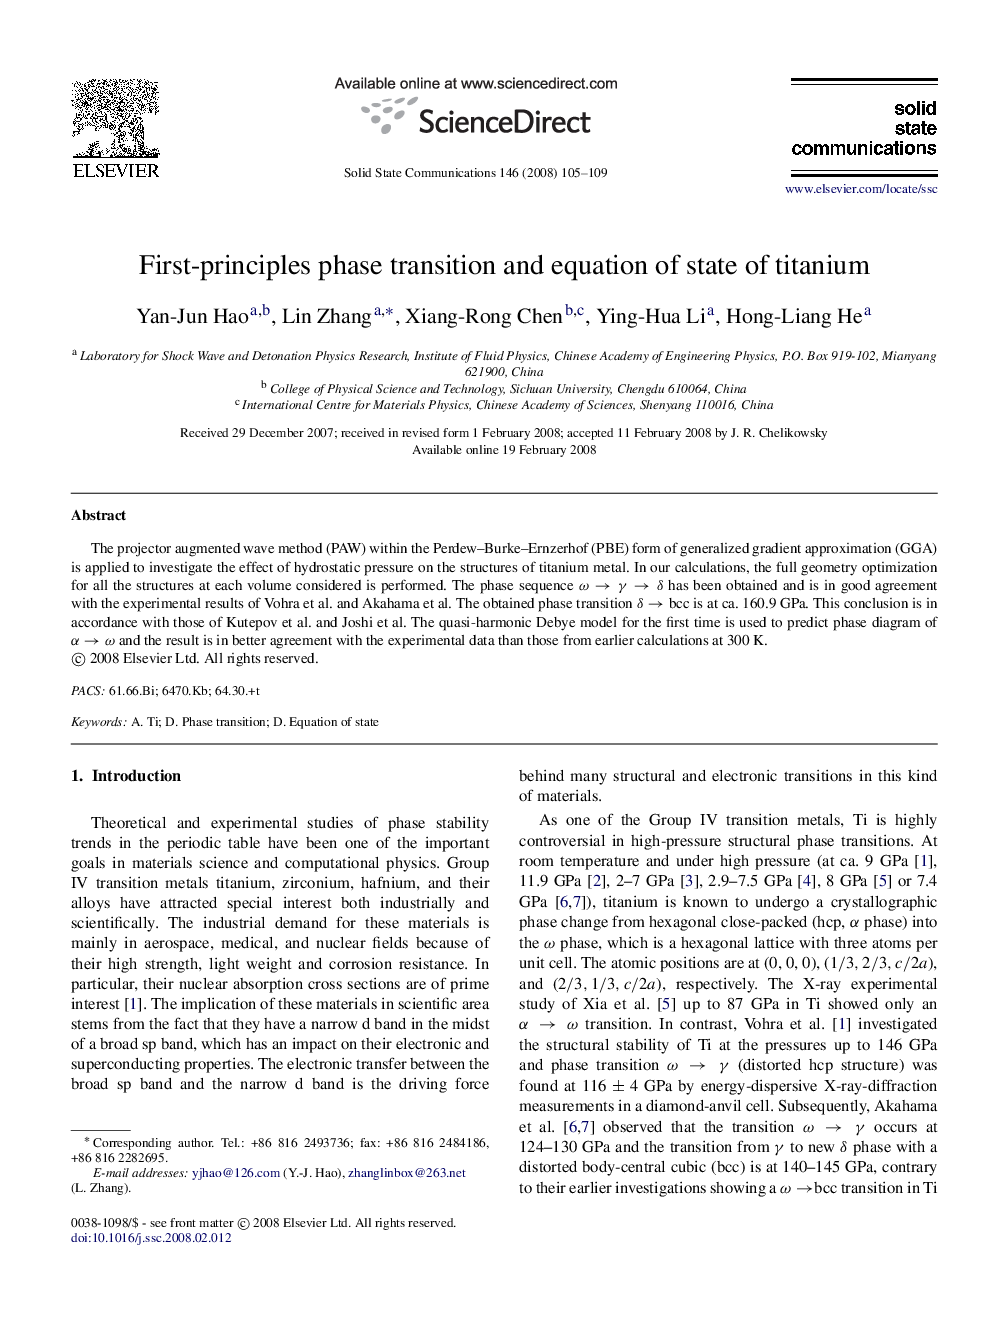 First-principles phase transition and equation of state of titanium